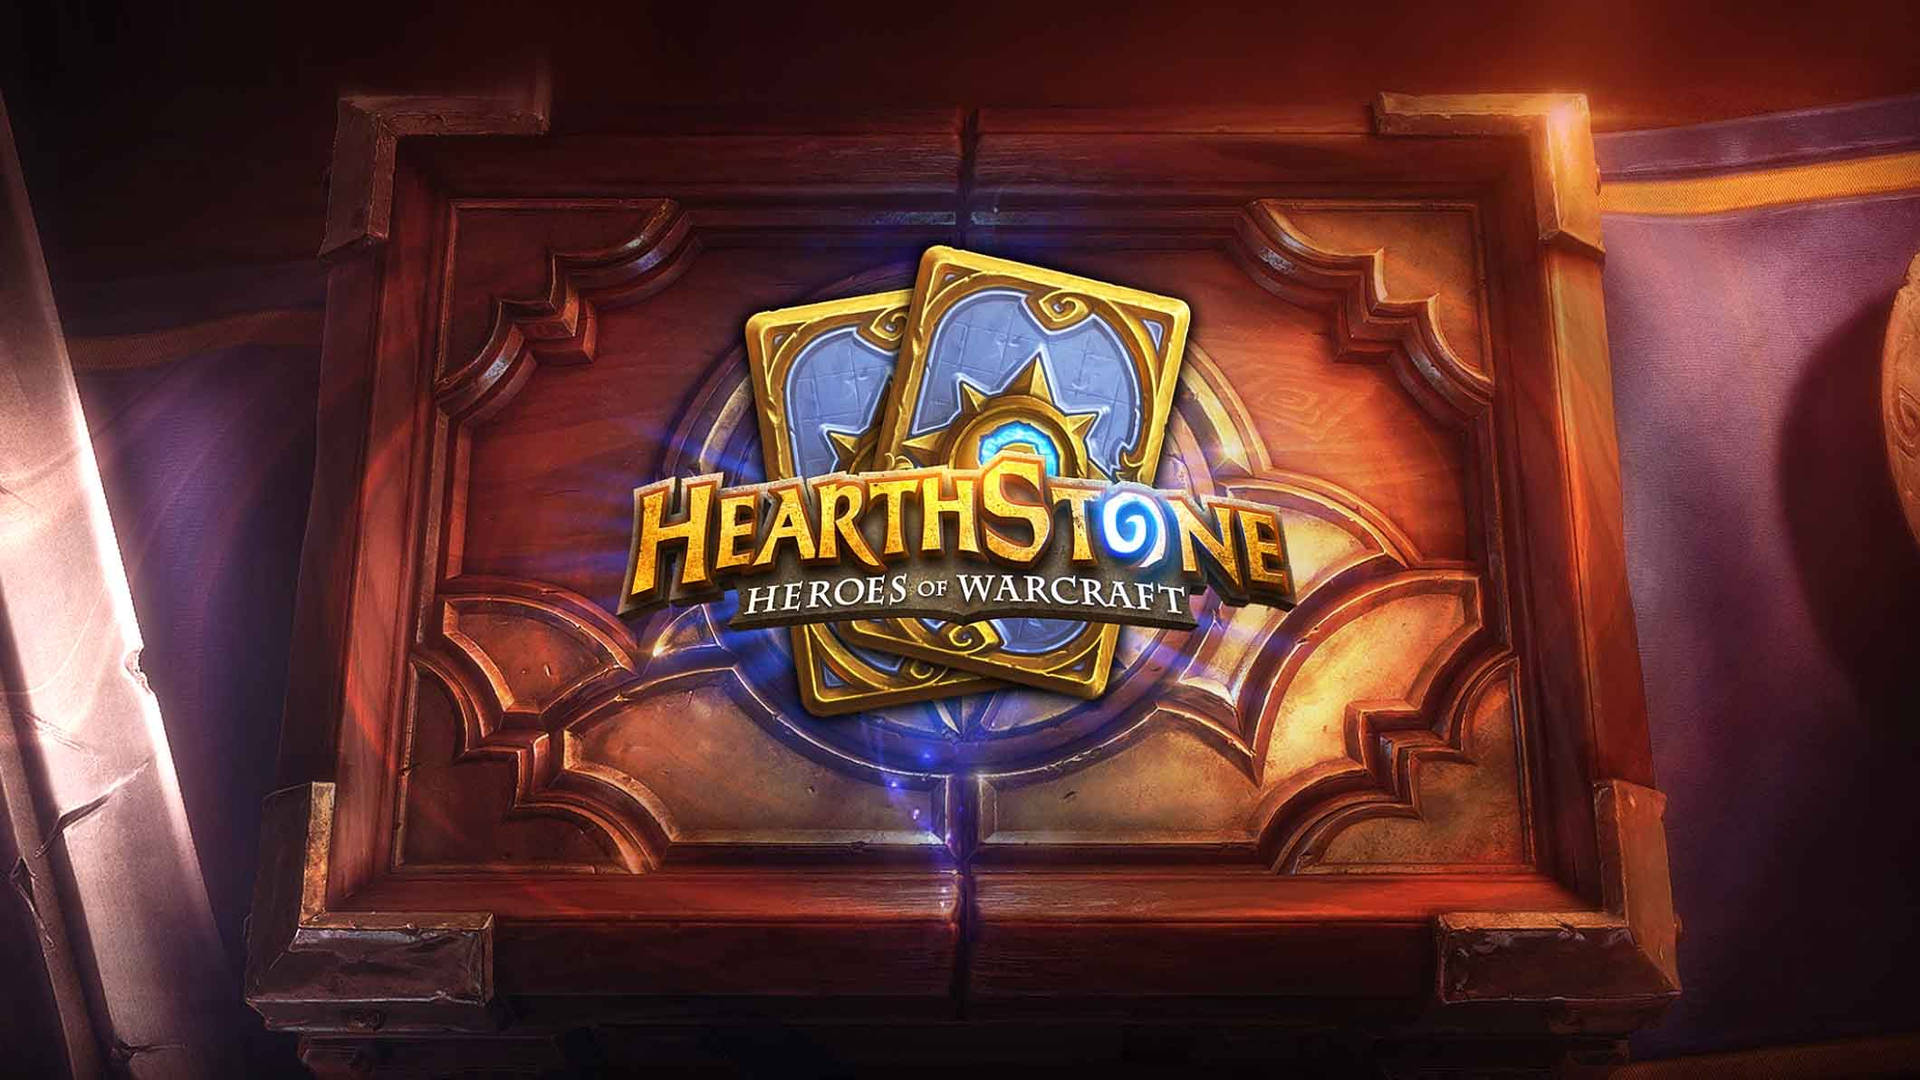 Legendary Hearthstone Card Game In Action